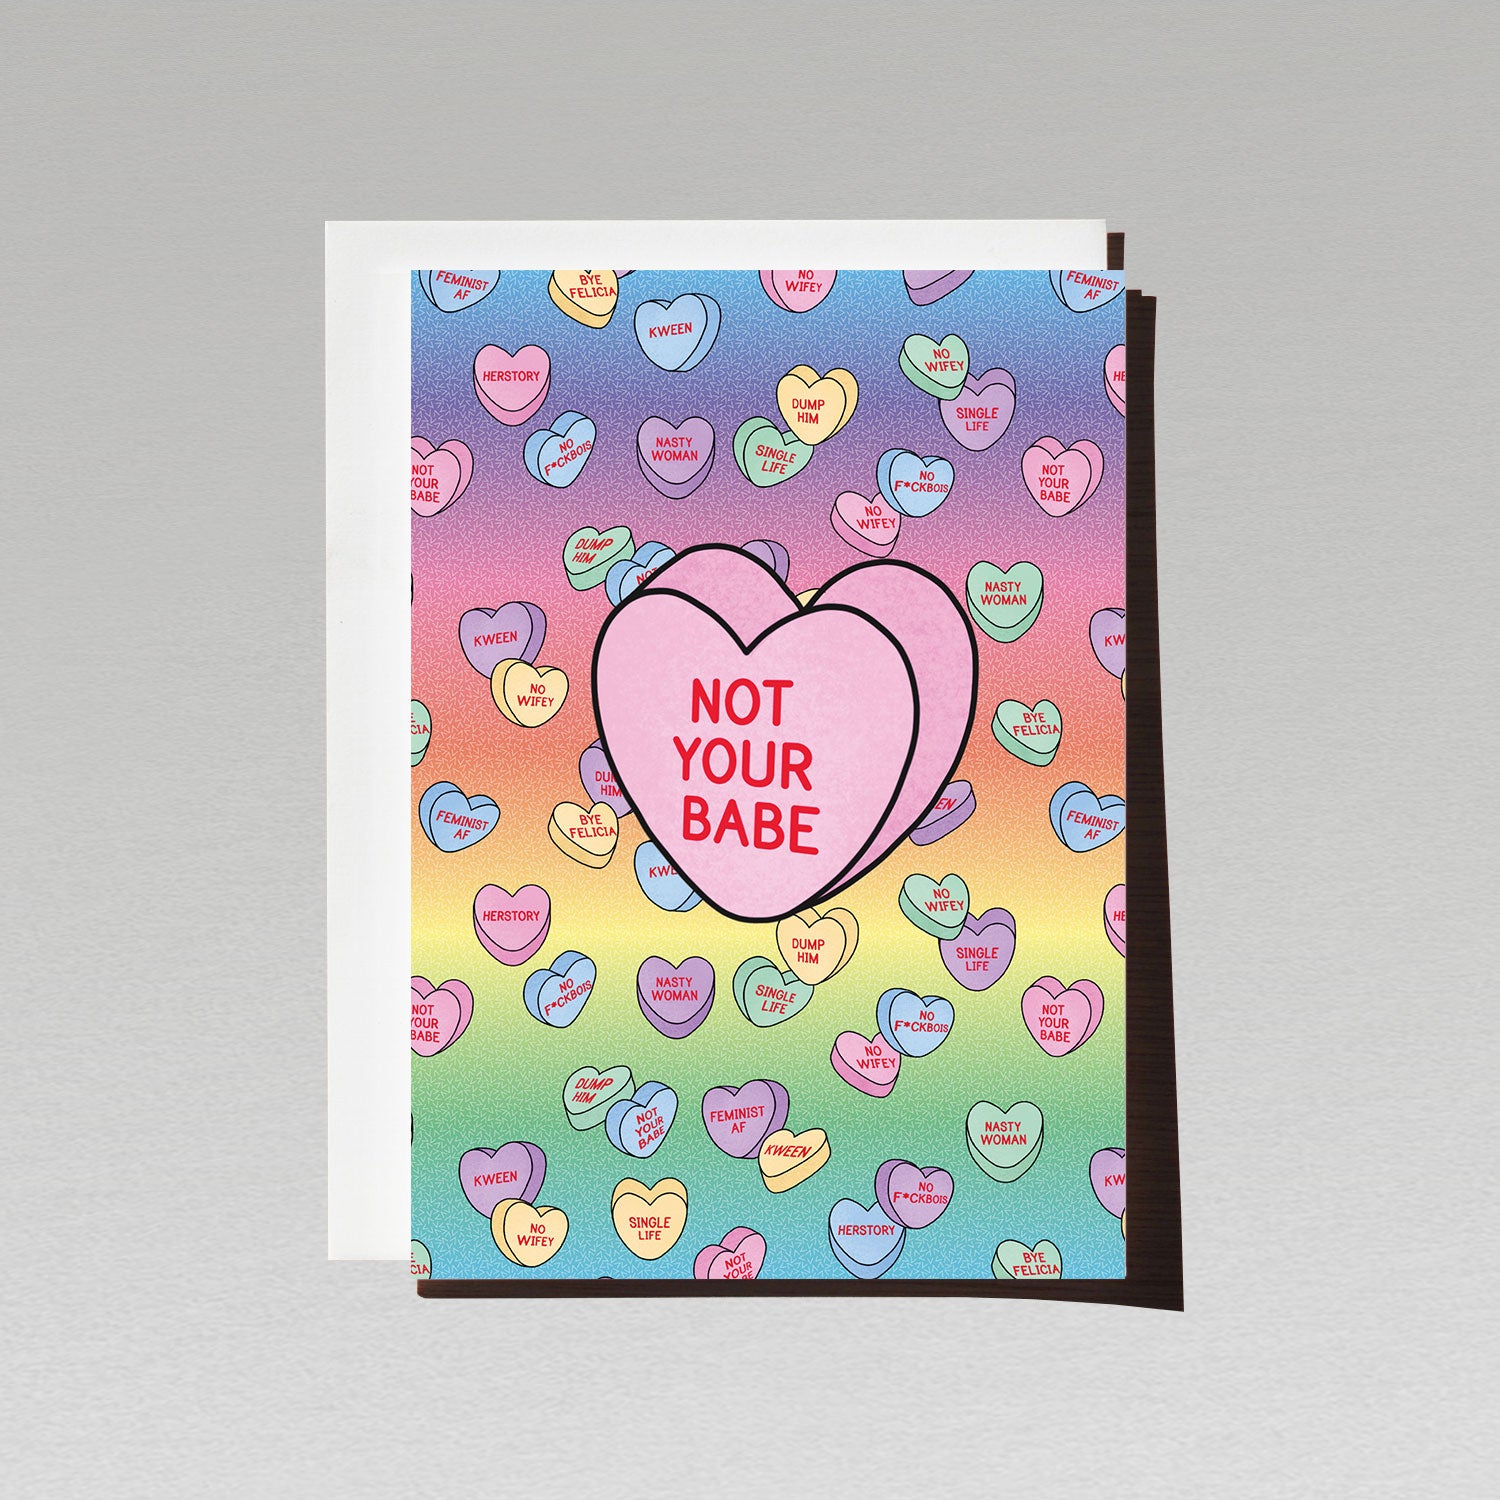 rainbow gradient background love greeting card with lots of candy hearts with female empowerment messages featuring one large pink candy heart with the text not your babe